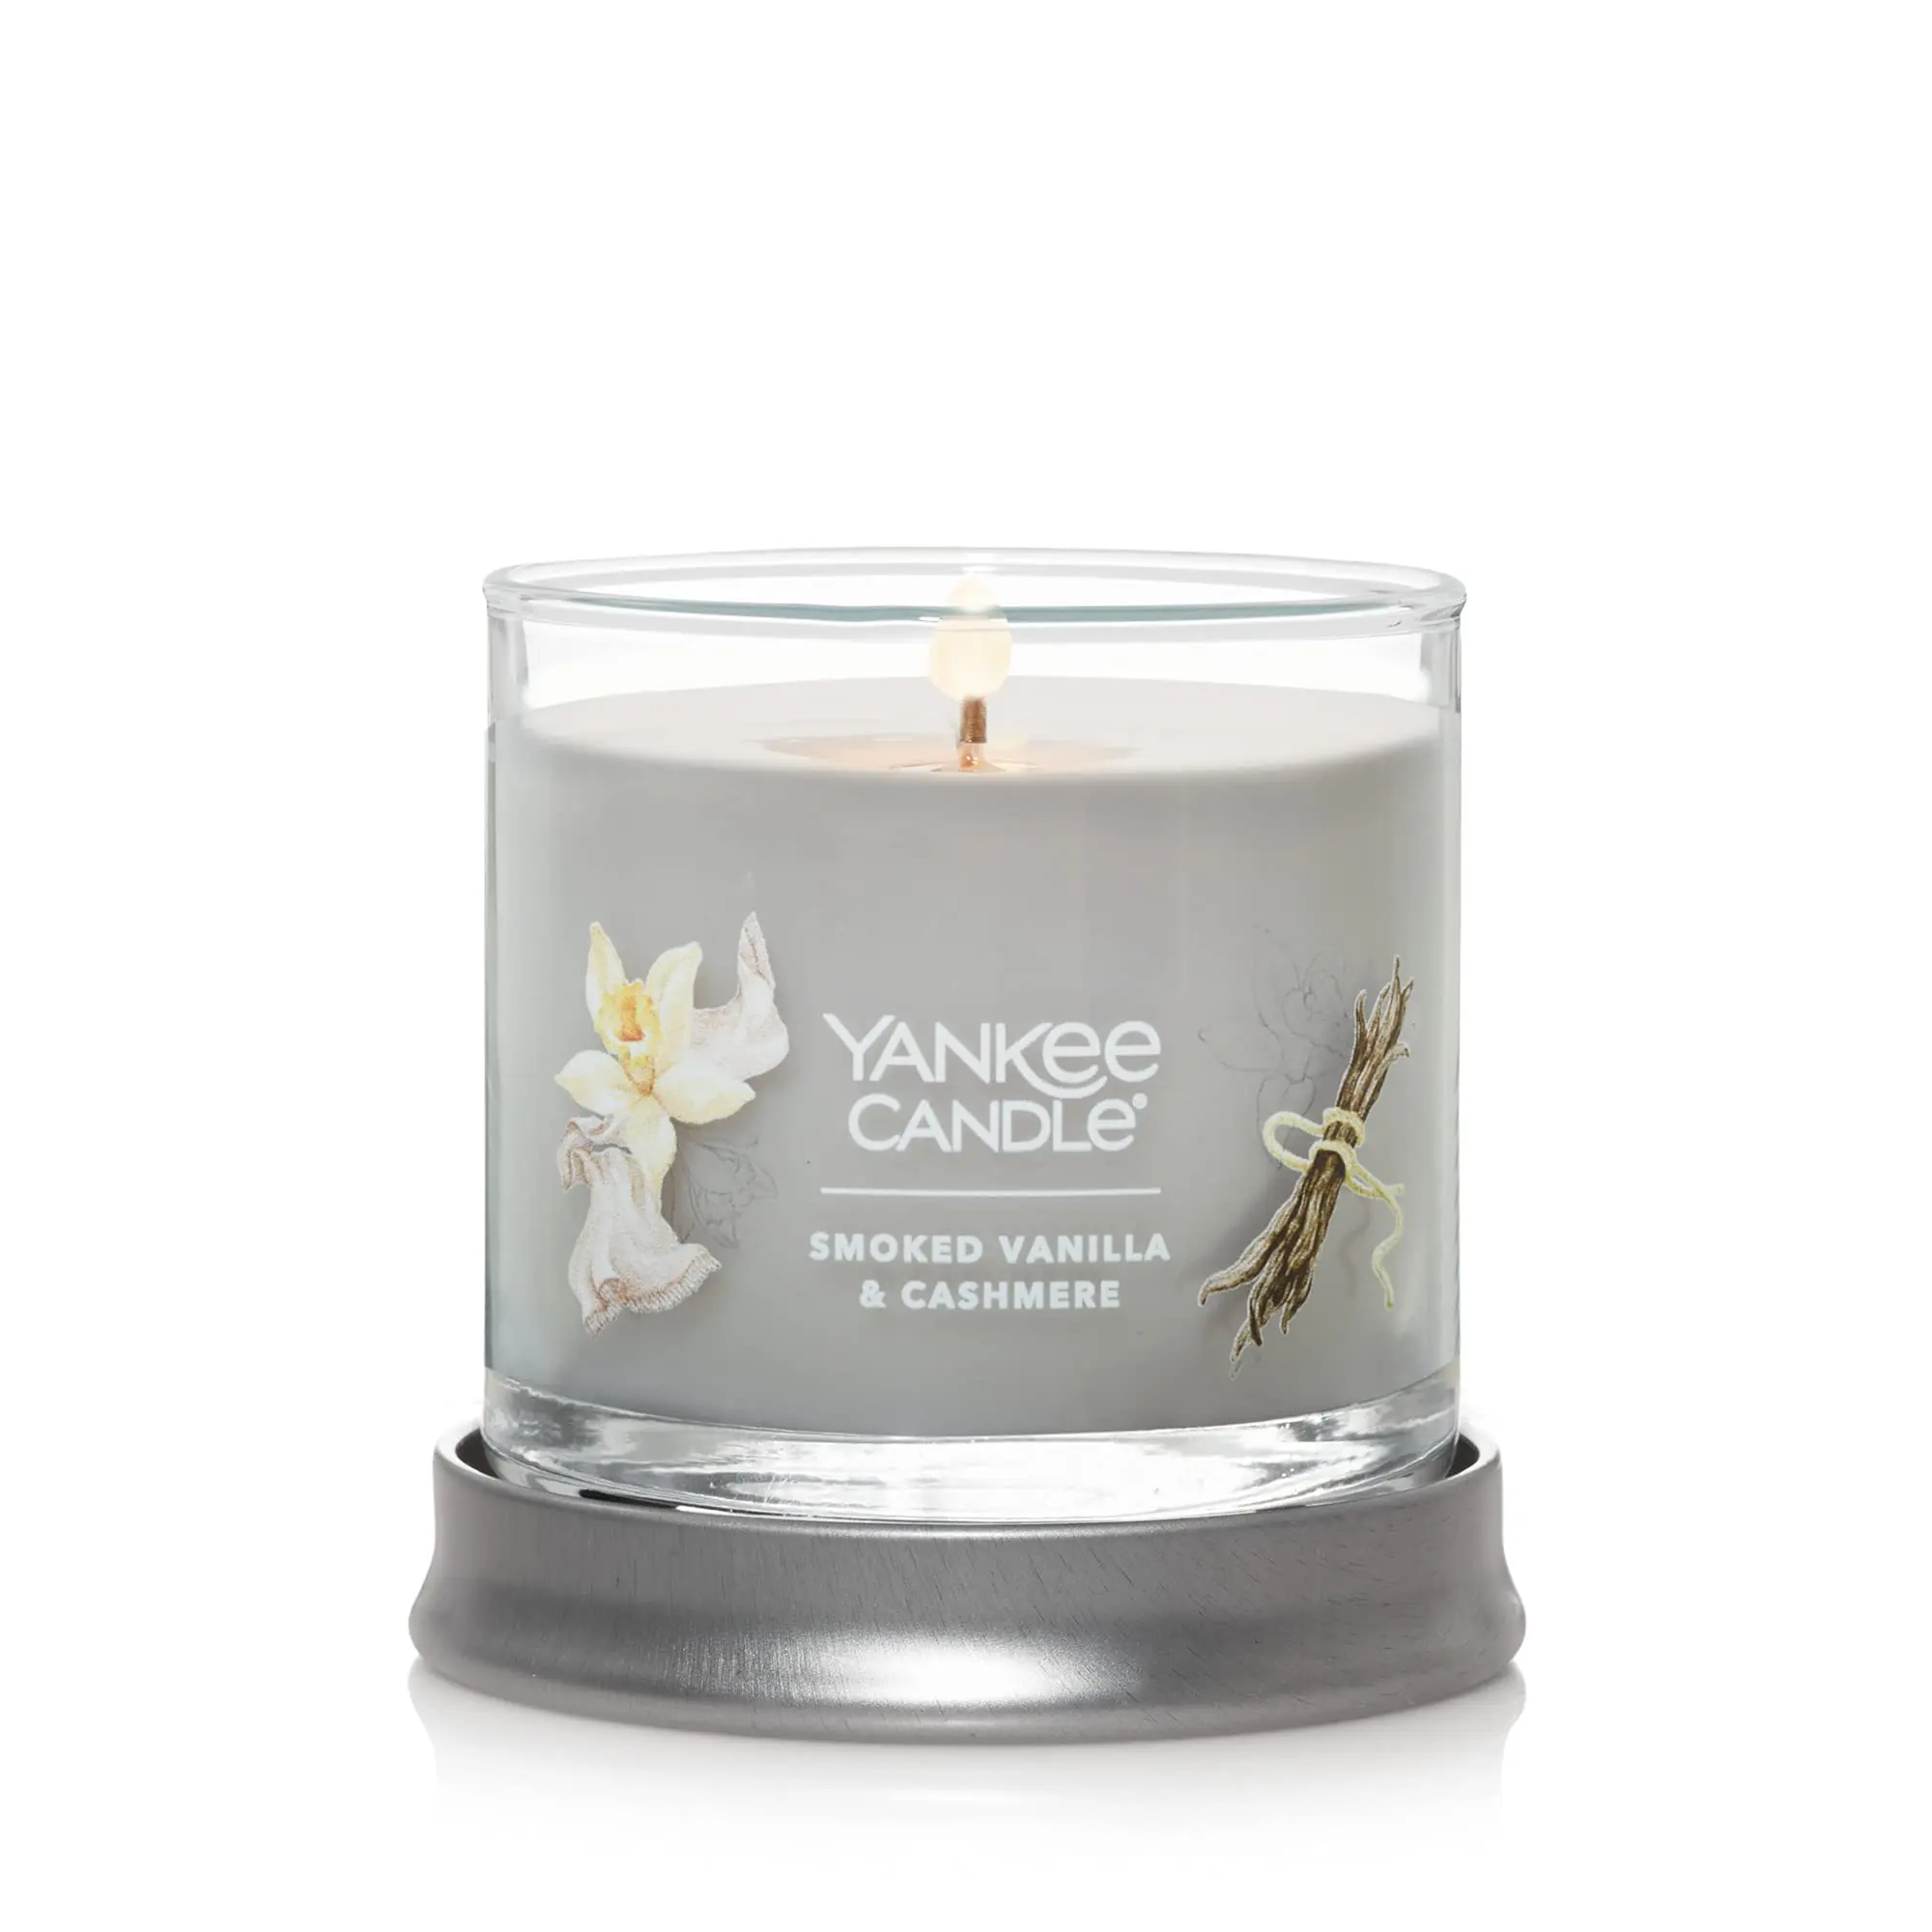 smoked vanilla and cashmere - Which candle brand smells the strongest